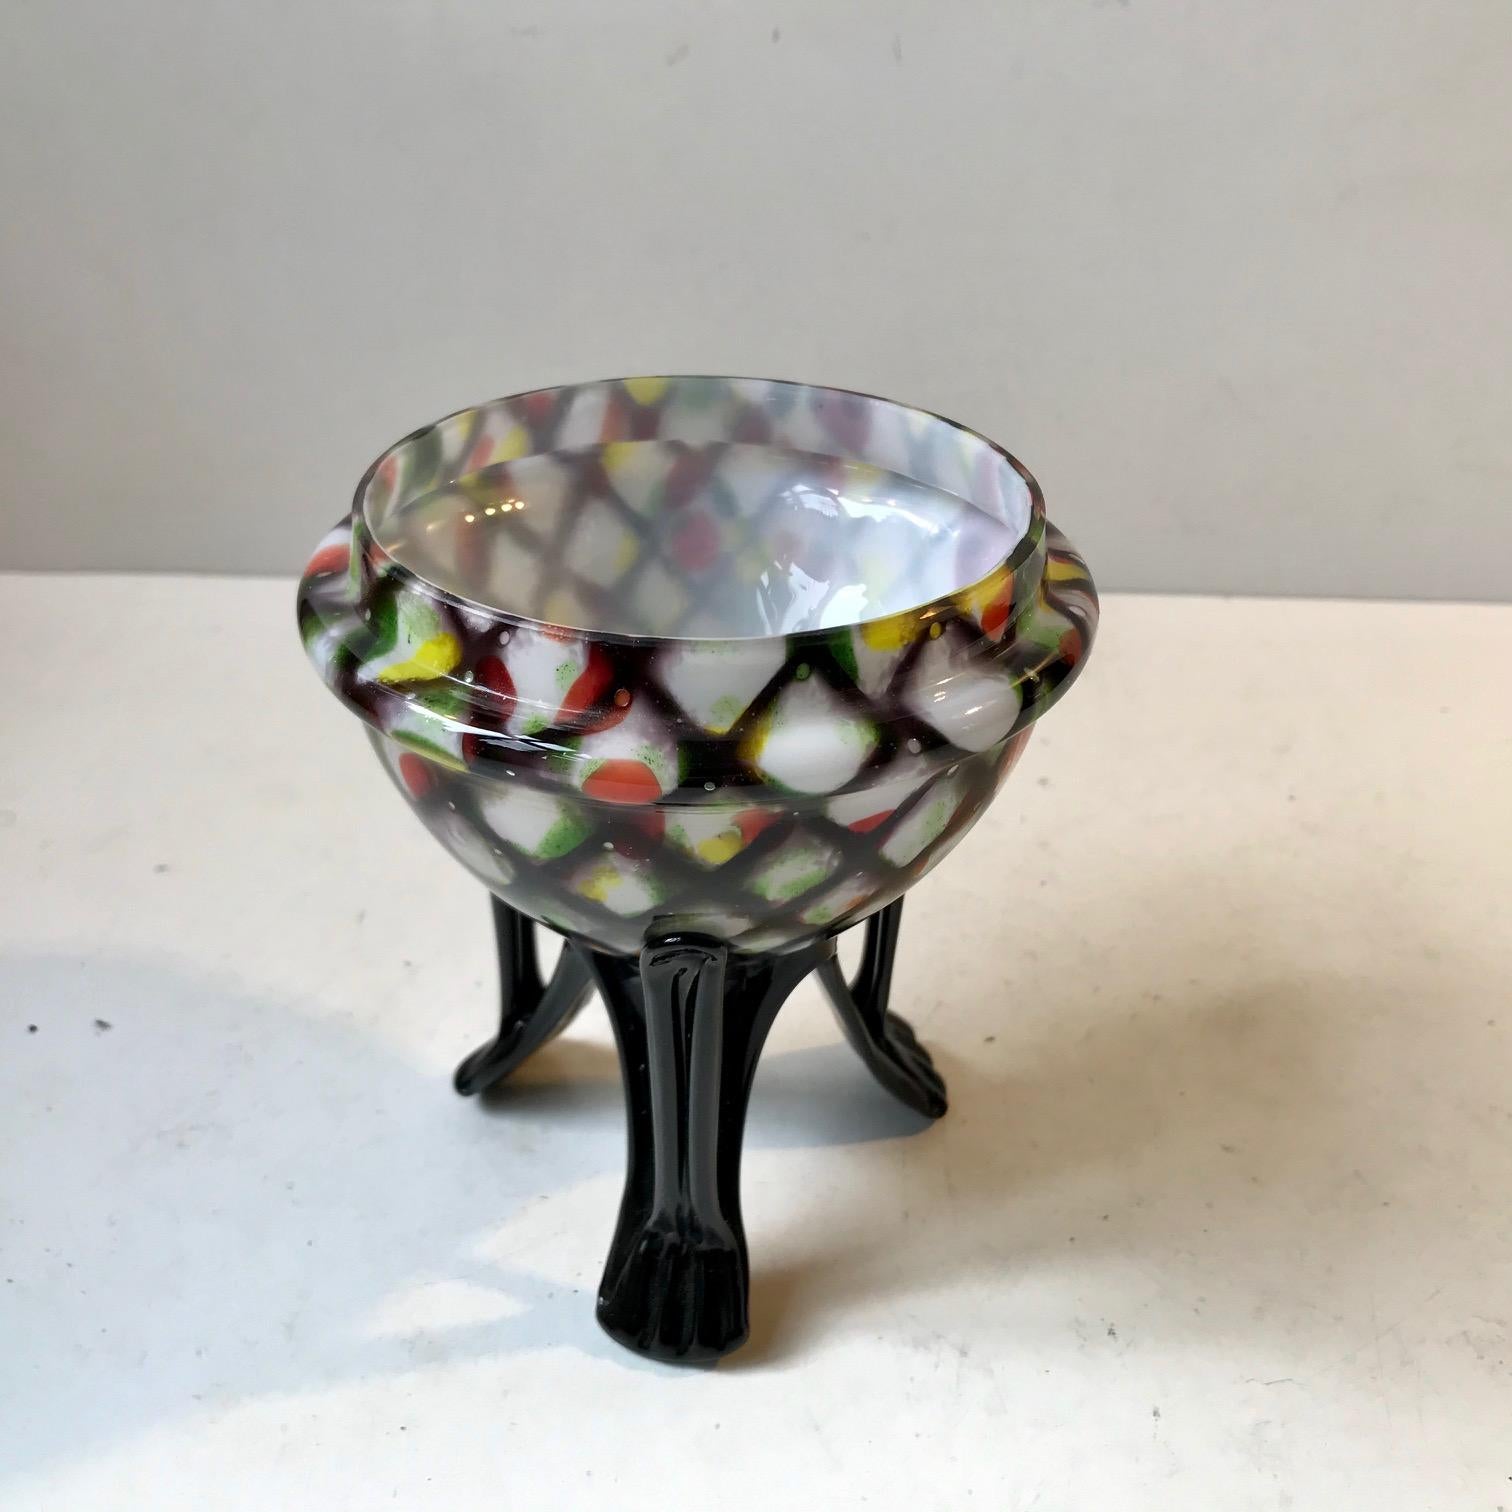 A handblown posy vase with a top part in harlequin pattern spatter glass cased upon white opaline glass. Its base is made from black glass shaped by hand. It was made during the 1930s in Bohemia/Czech Republic by Franz Weltz.